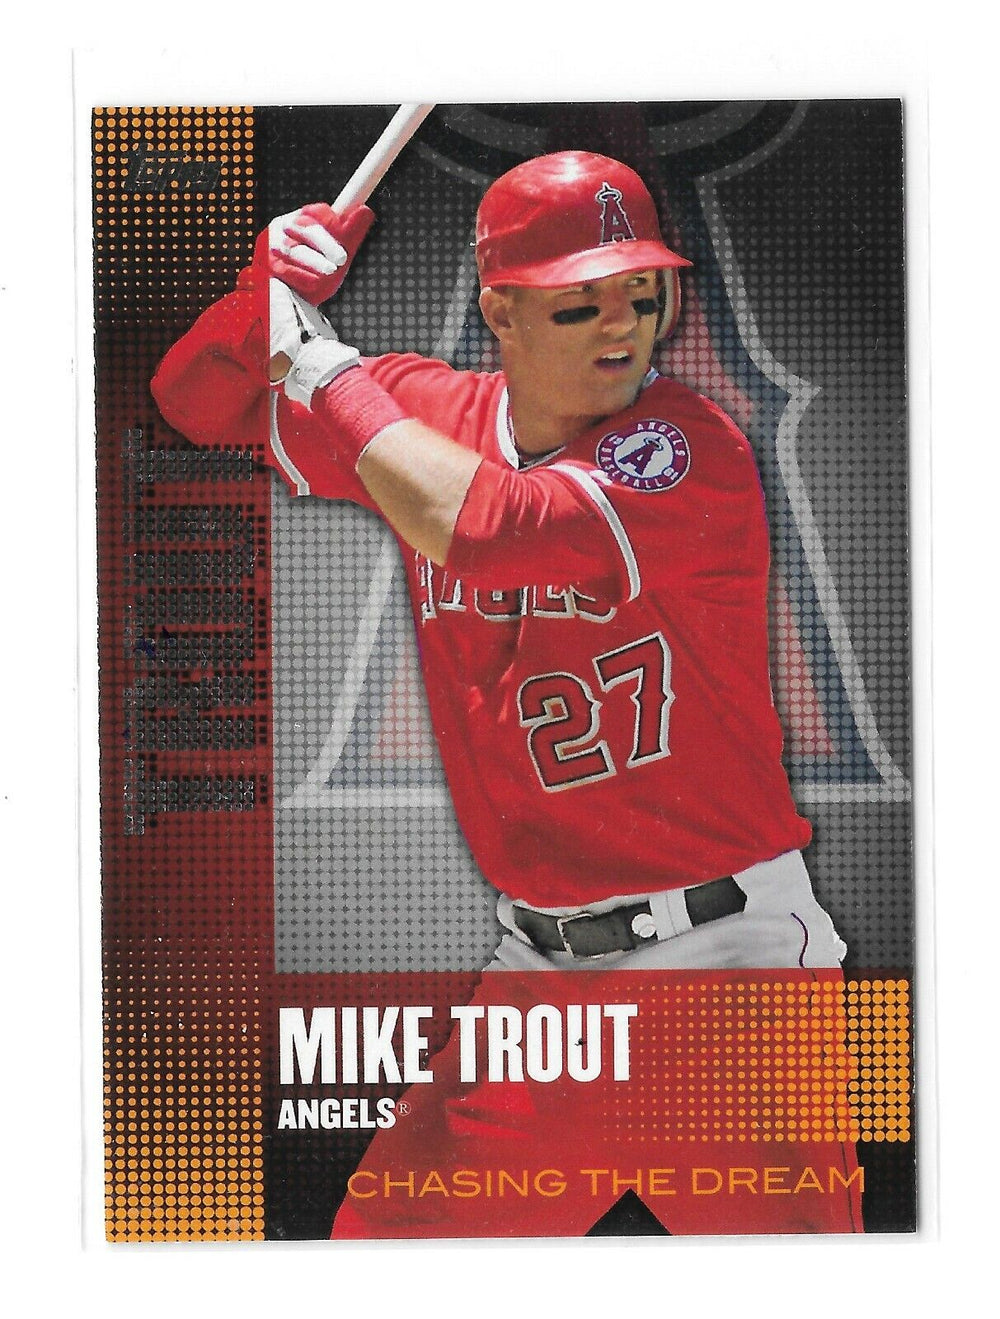 Mike Trout 2013 Topps Chasing the Dream Series Mint Card #CD-2